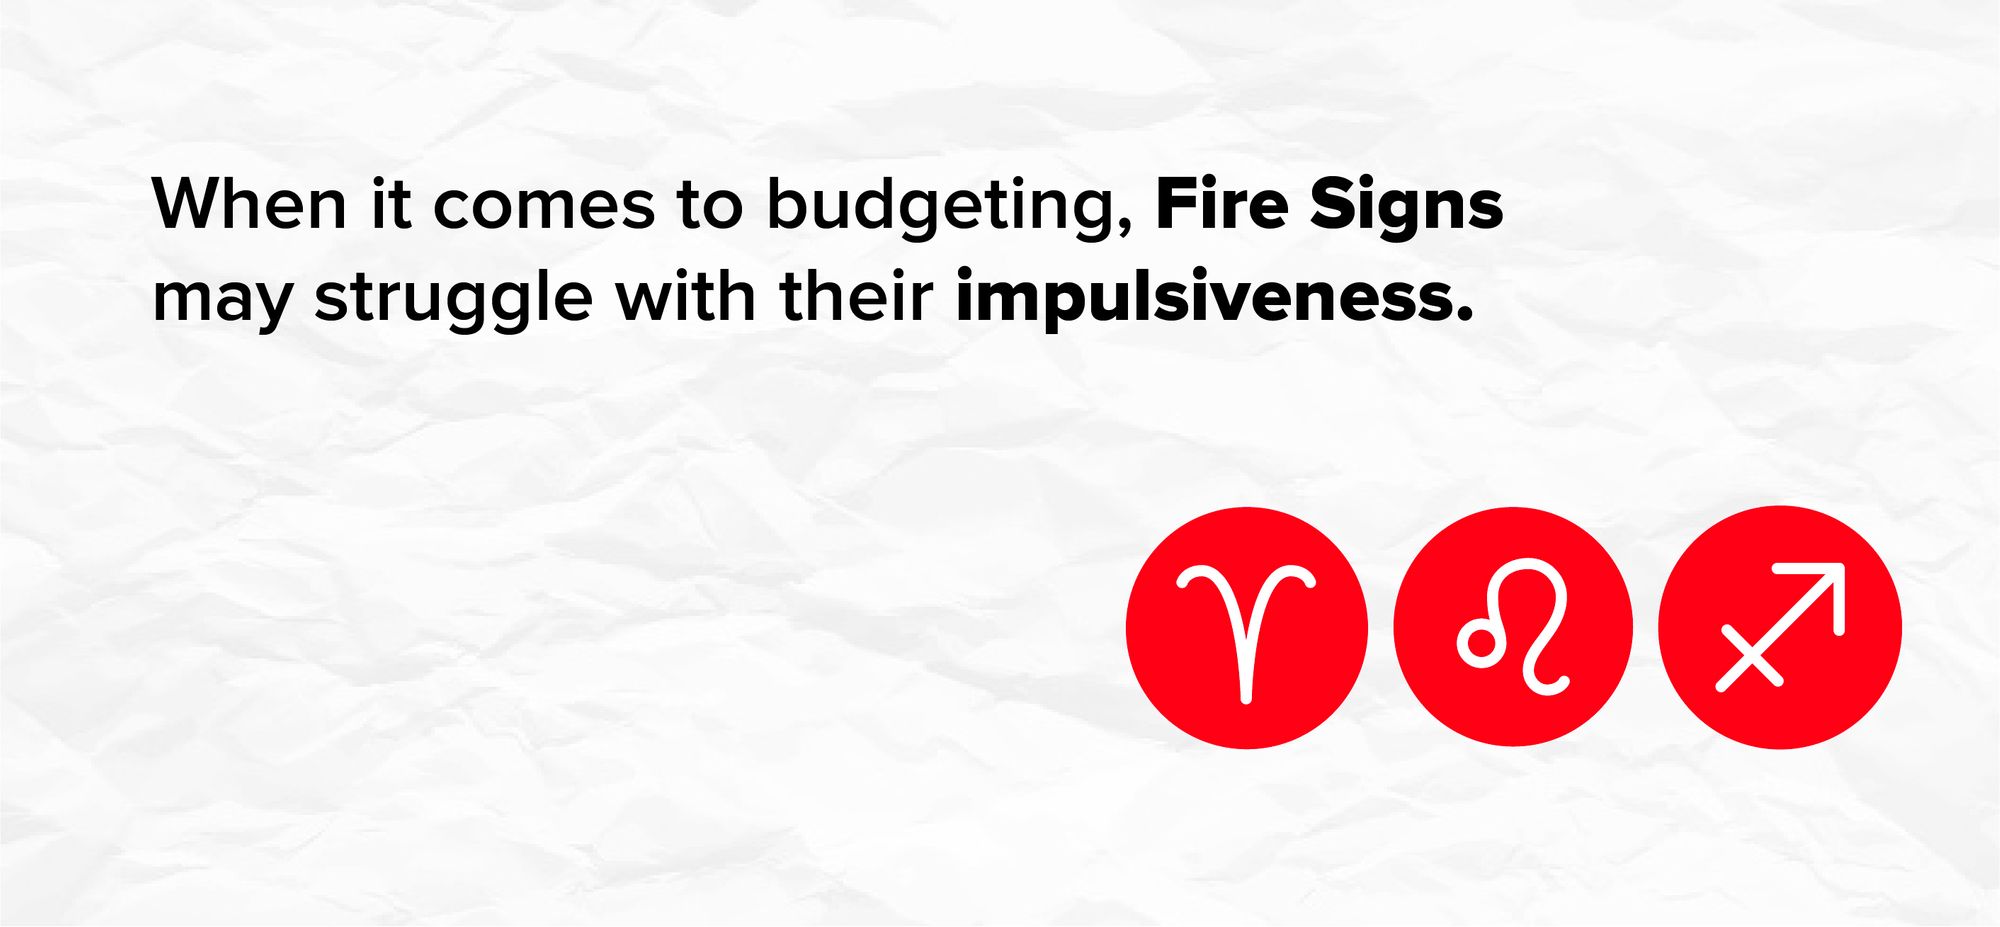 When it comes to budgeting, Fire Signs may struggle with their impulsiveness.